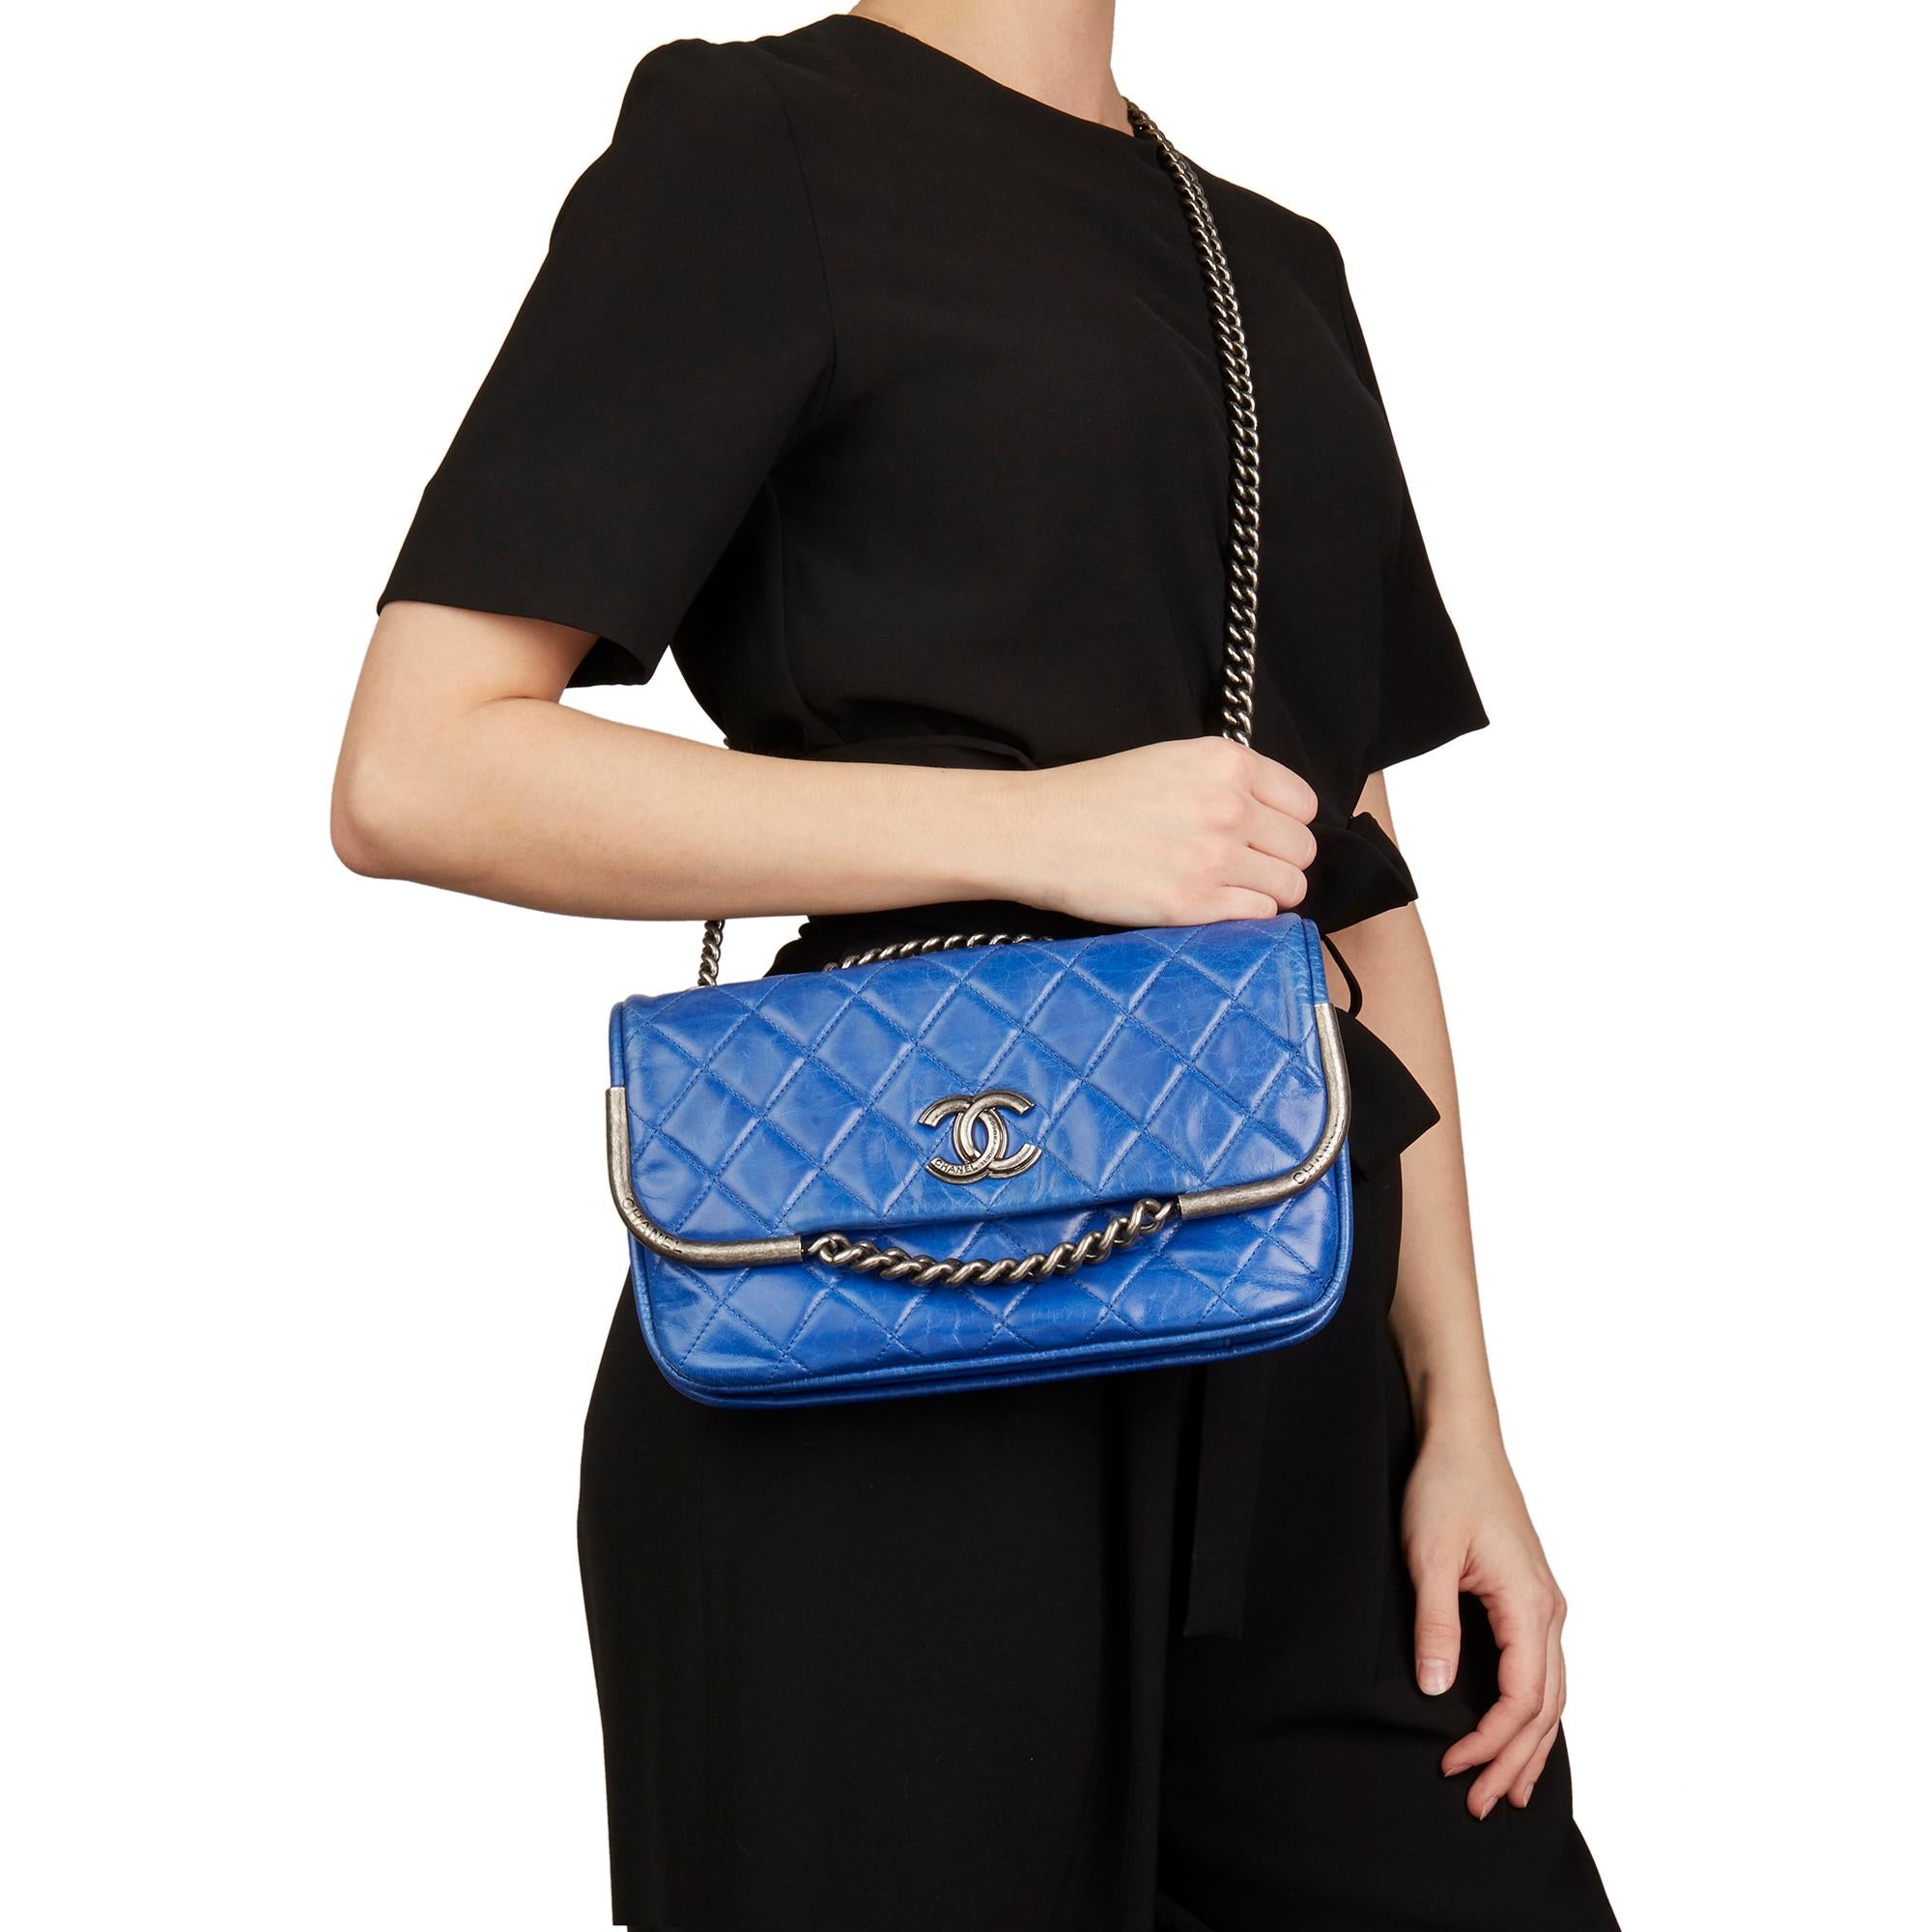 2014 Chanel Electric Blue Quilted Aged Calfskin Leather Single Flap Bag 6